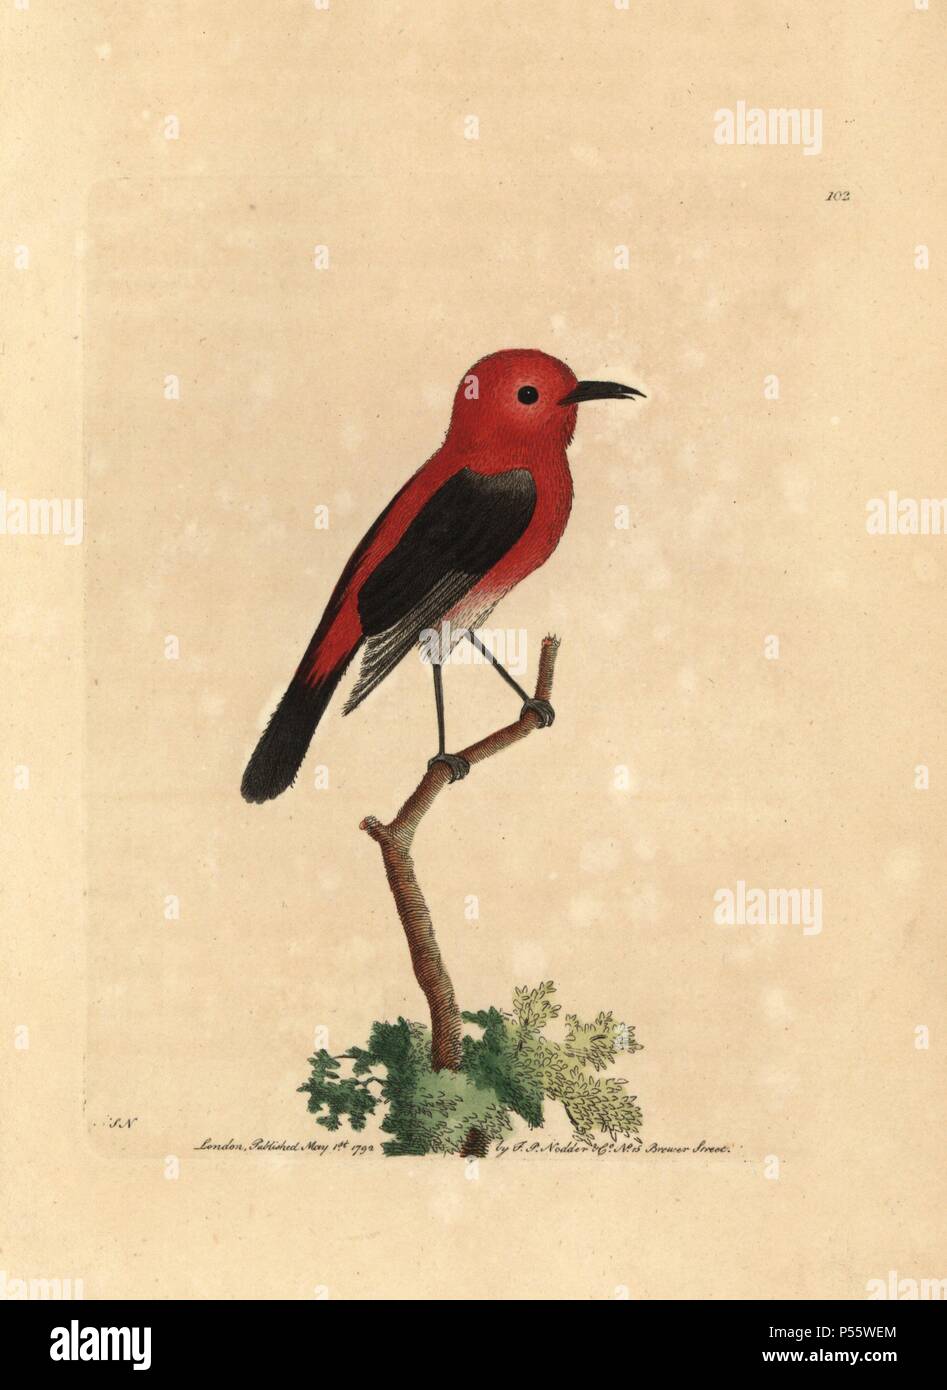 Cardinal myzomela, Myzomela cardinalis. Illustration signed SN (George Shaw and Frederick Nodder).. Handcolored copperplate engraving from George Shaw and Frederick Nodder's 'The Naturalist's Miscellany' 1792.. Frederick Polydore Nodder (17511801?) was a gifted natural history artist and engraver. Nodder honed his draftsmanship working on Captain Cook and Joseph Banks' Florilegium and engraving Sydney Parkinson's sketches of Australian plants. He was made 'botanic painter to her majesty' Queen Charlotte in 1785. Nodder also drew the botanical studies in Thomas Martyn's Flora Rustica (1792) an Stock Photo